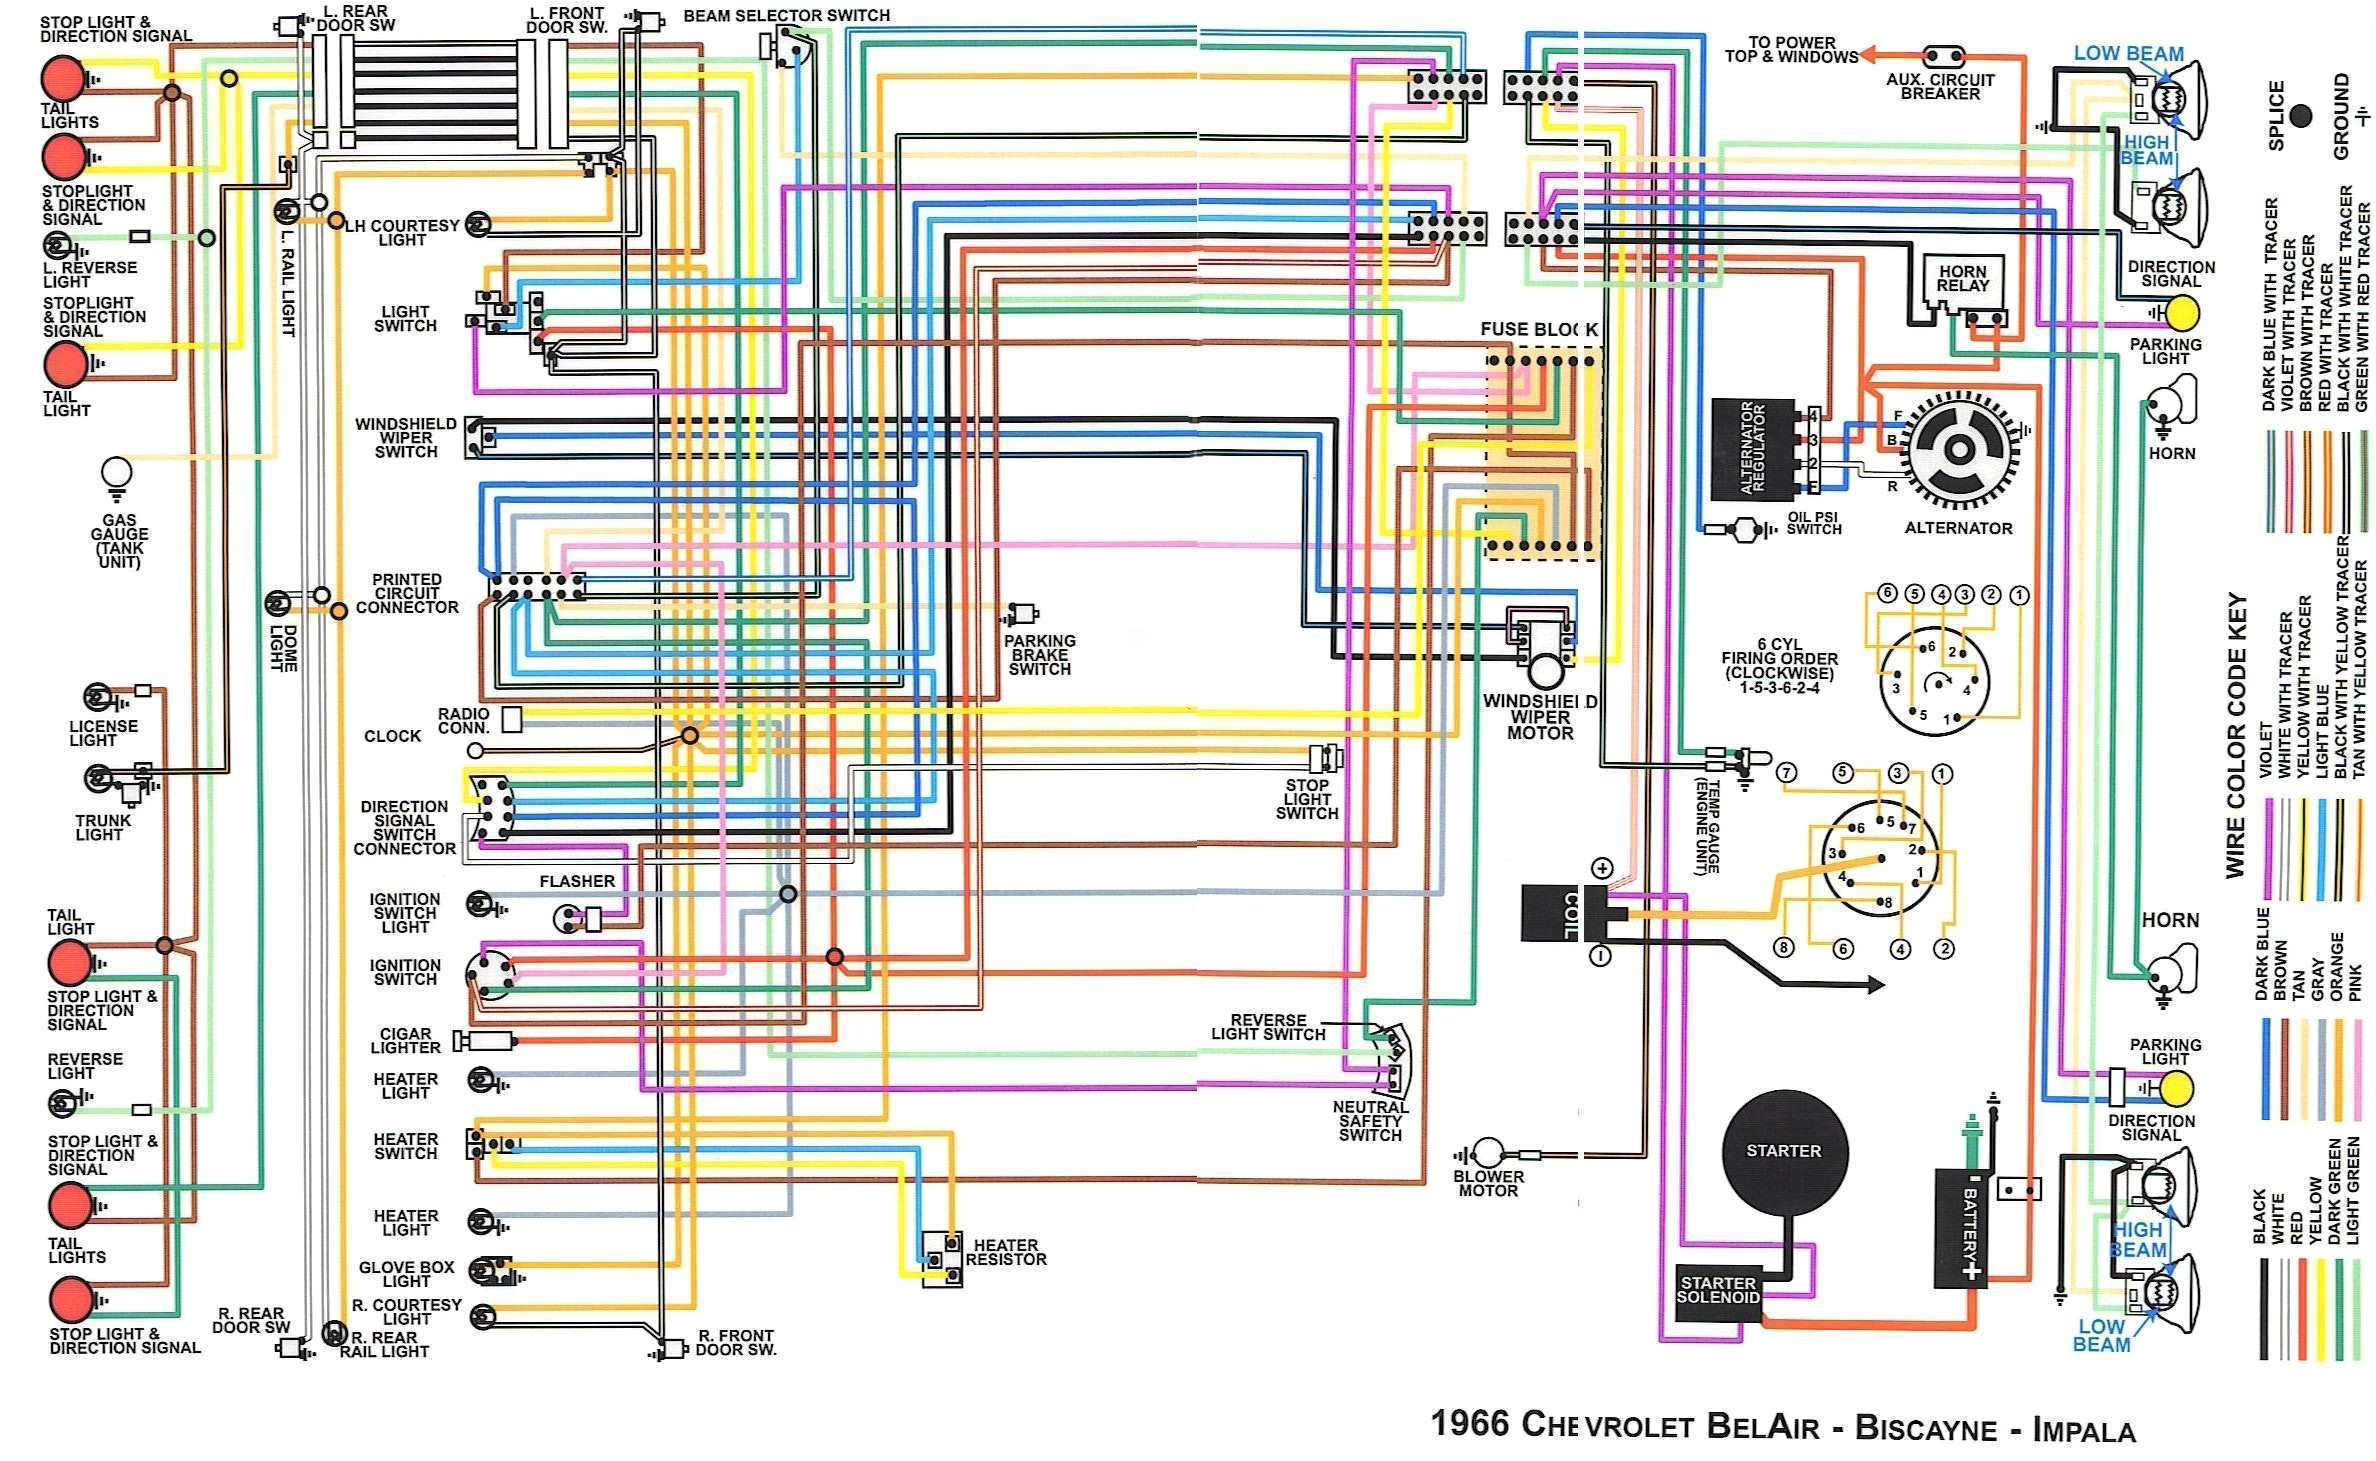 1970 camaro wiring diagram android apps on google play wiring diagram 1970 camaro wiring diagram android apps on google play